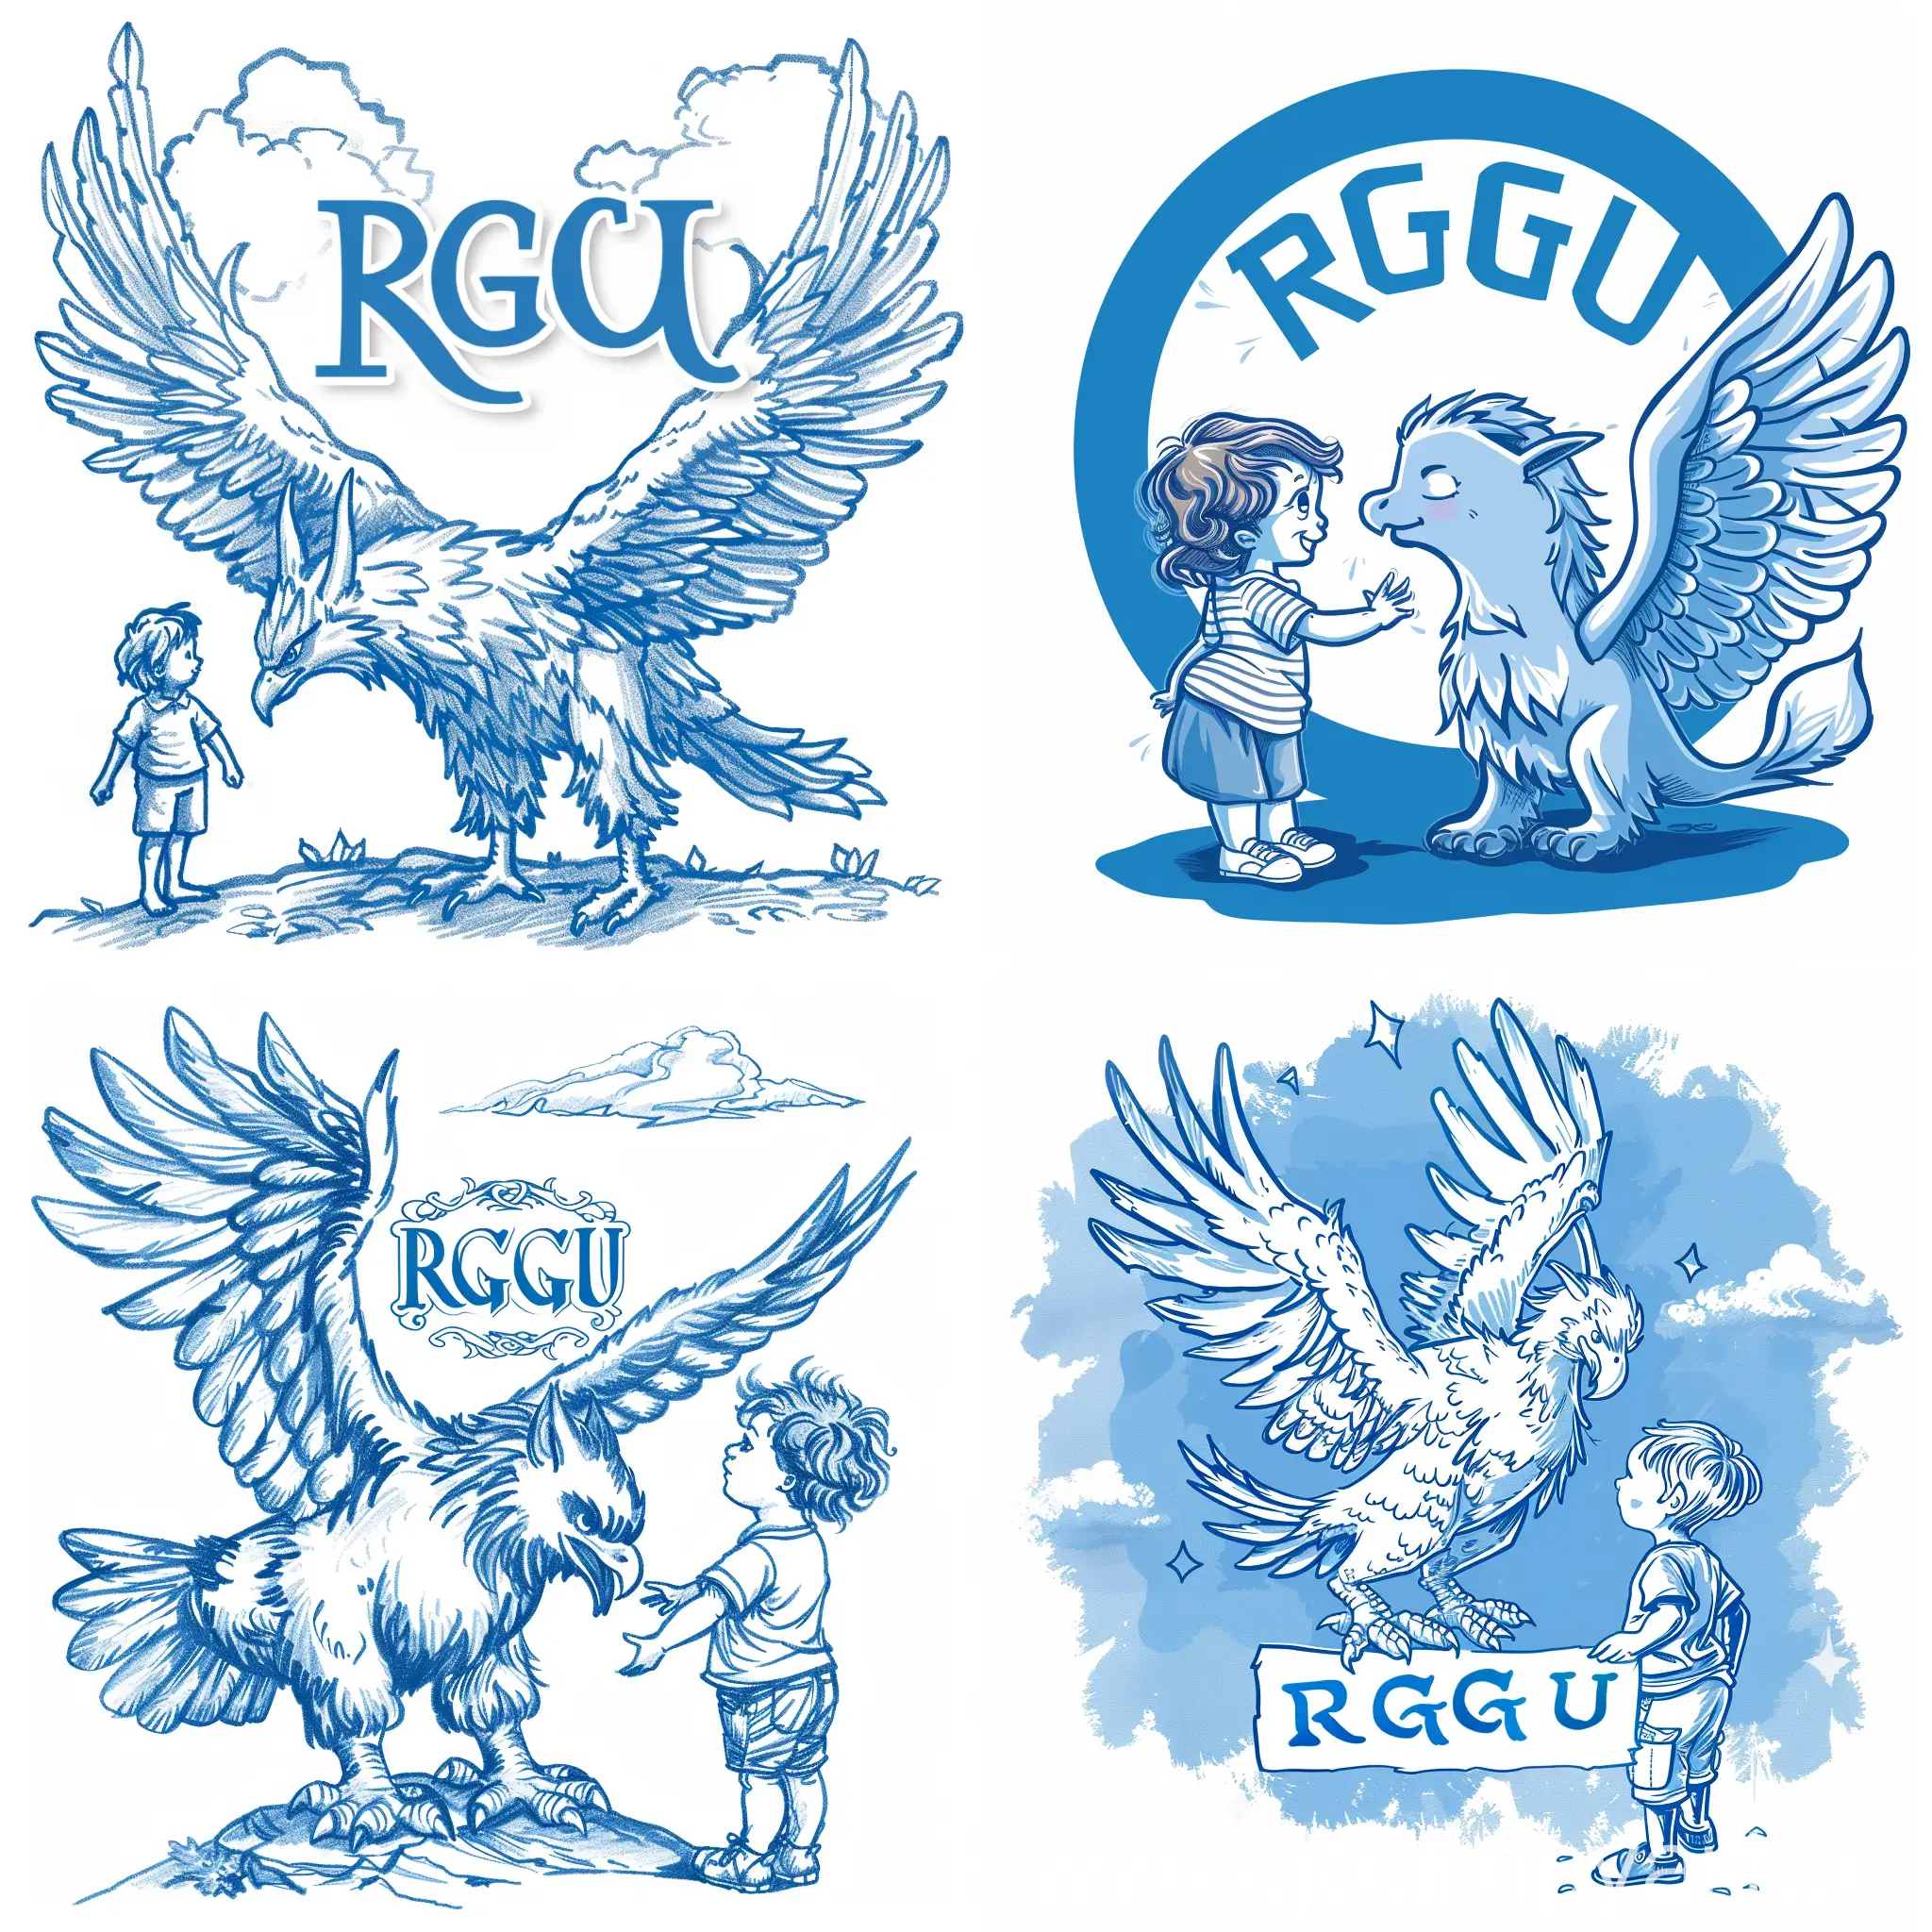 RGGU-Logo-Illustration-Featuring-a-Griffon-Child-in-Vibrant-Blue-Colors